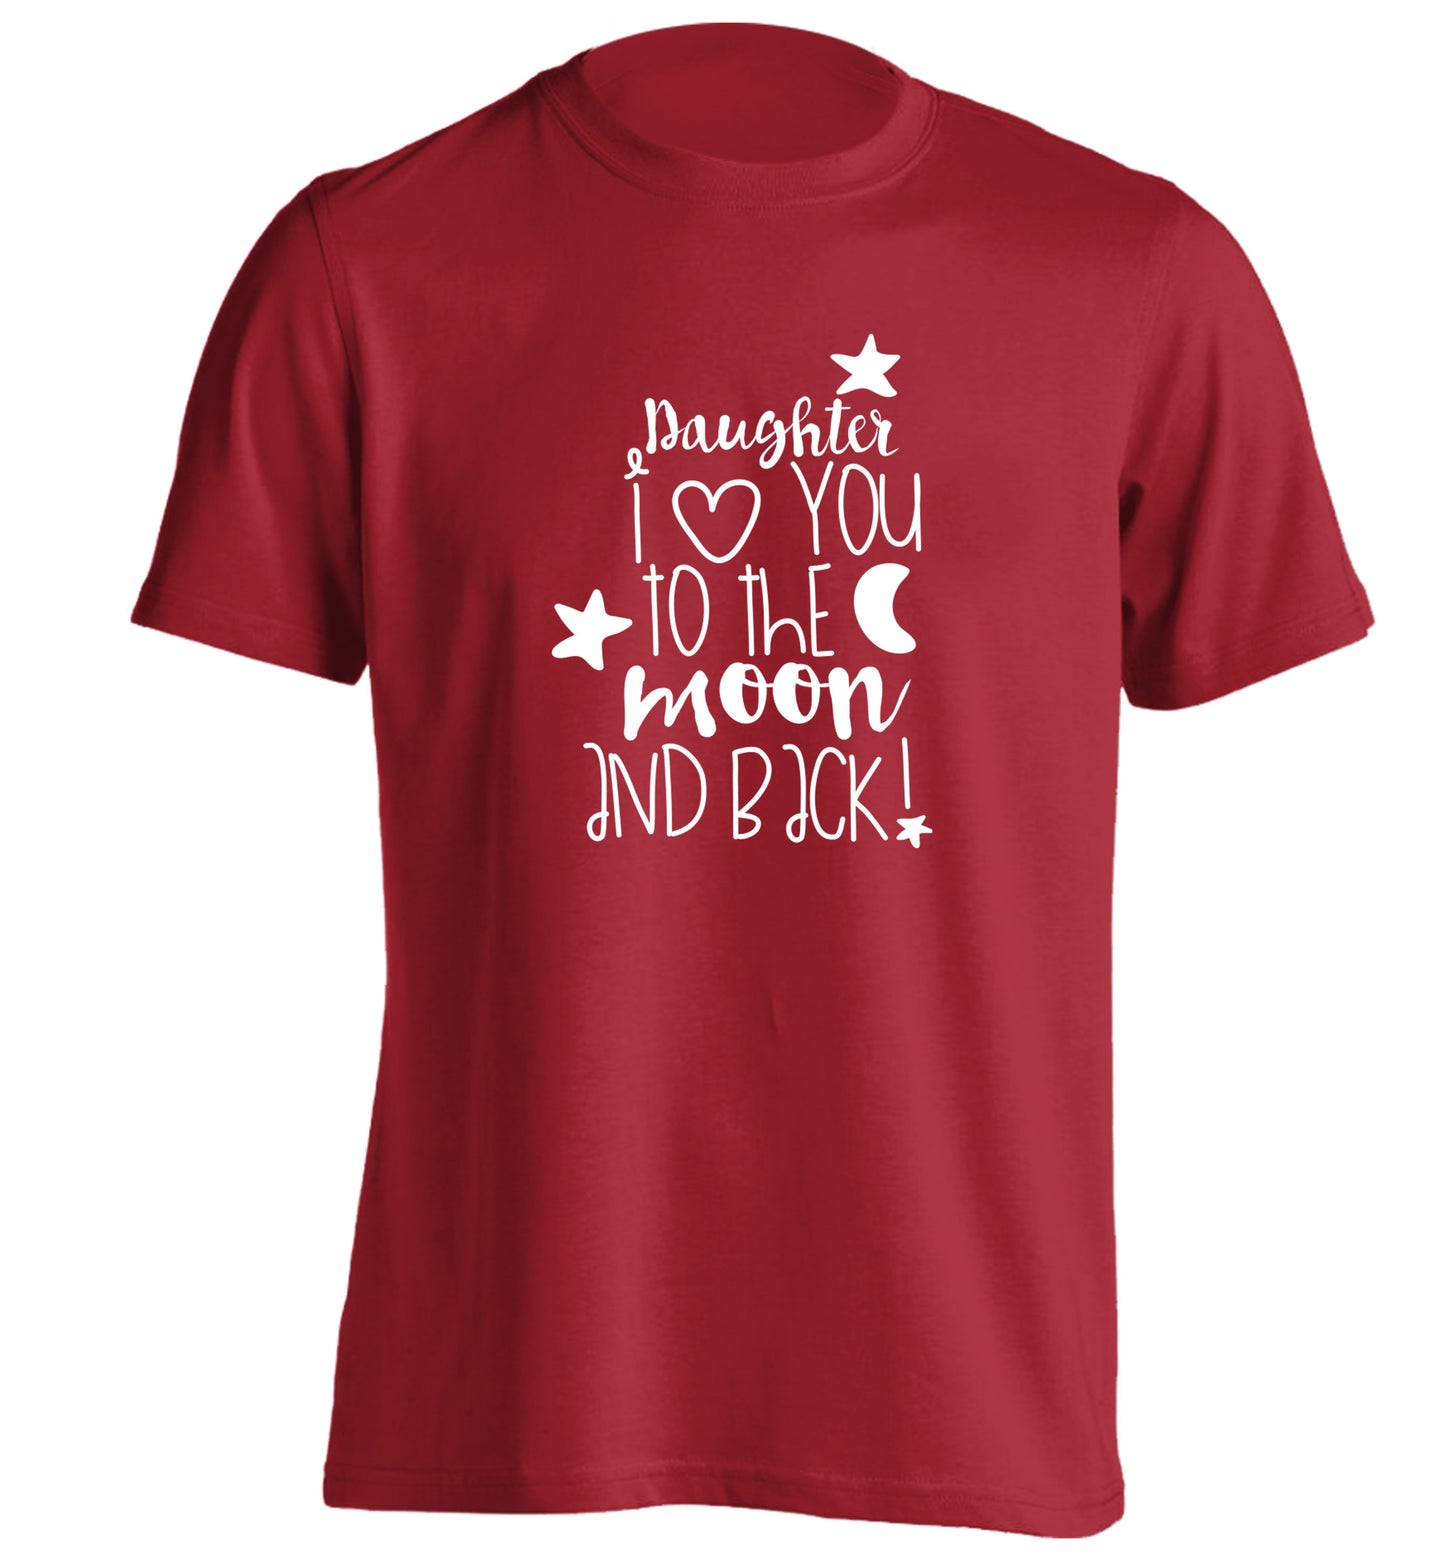 Daughter I love you to the moon and back adults unisex red Tshirt 2XL